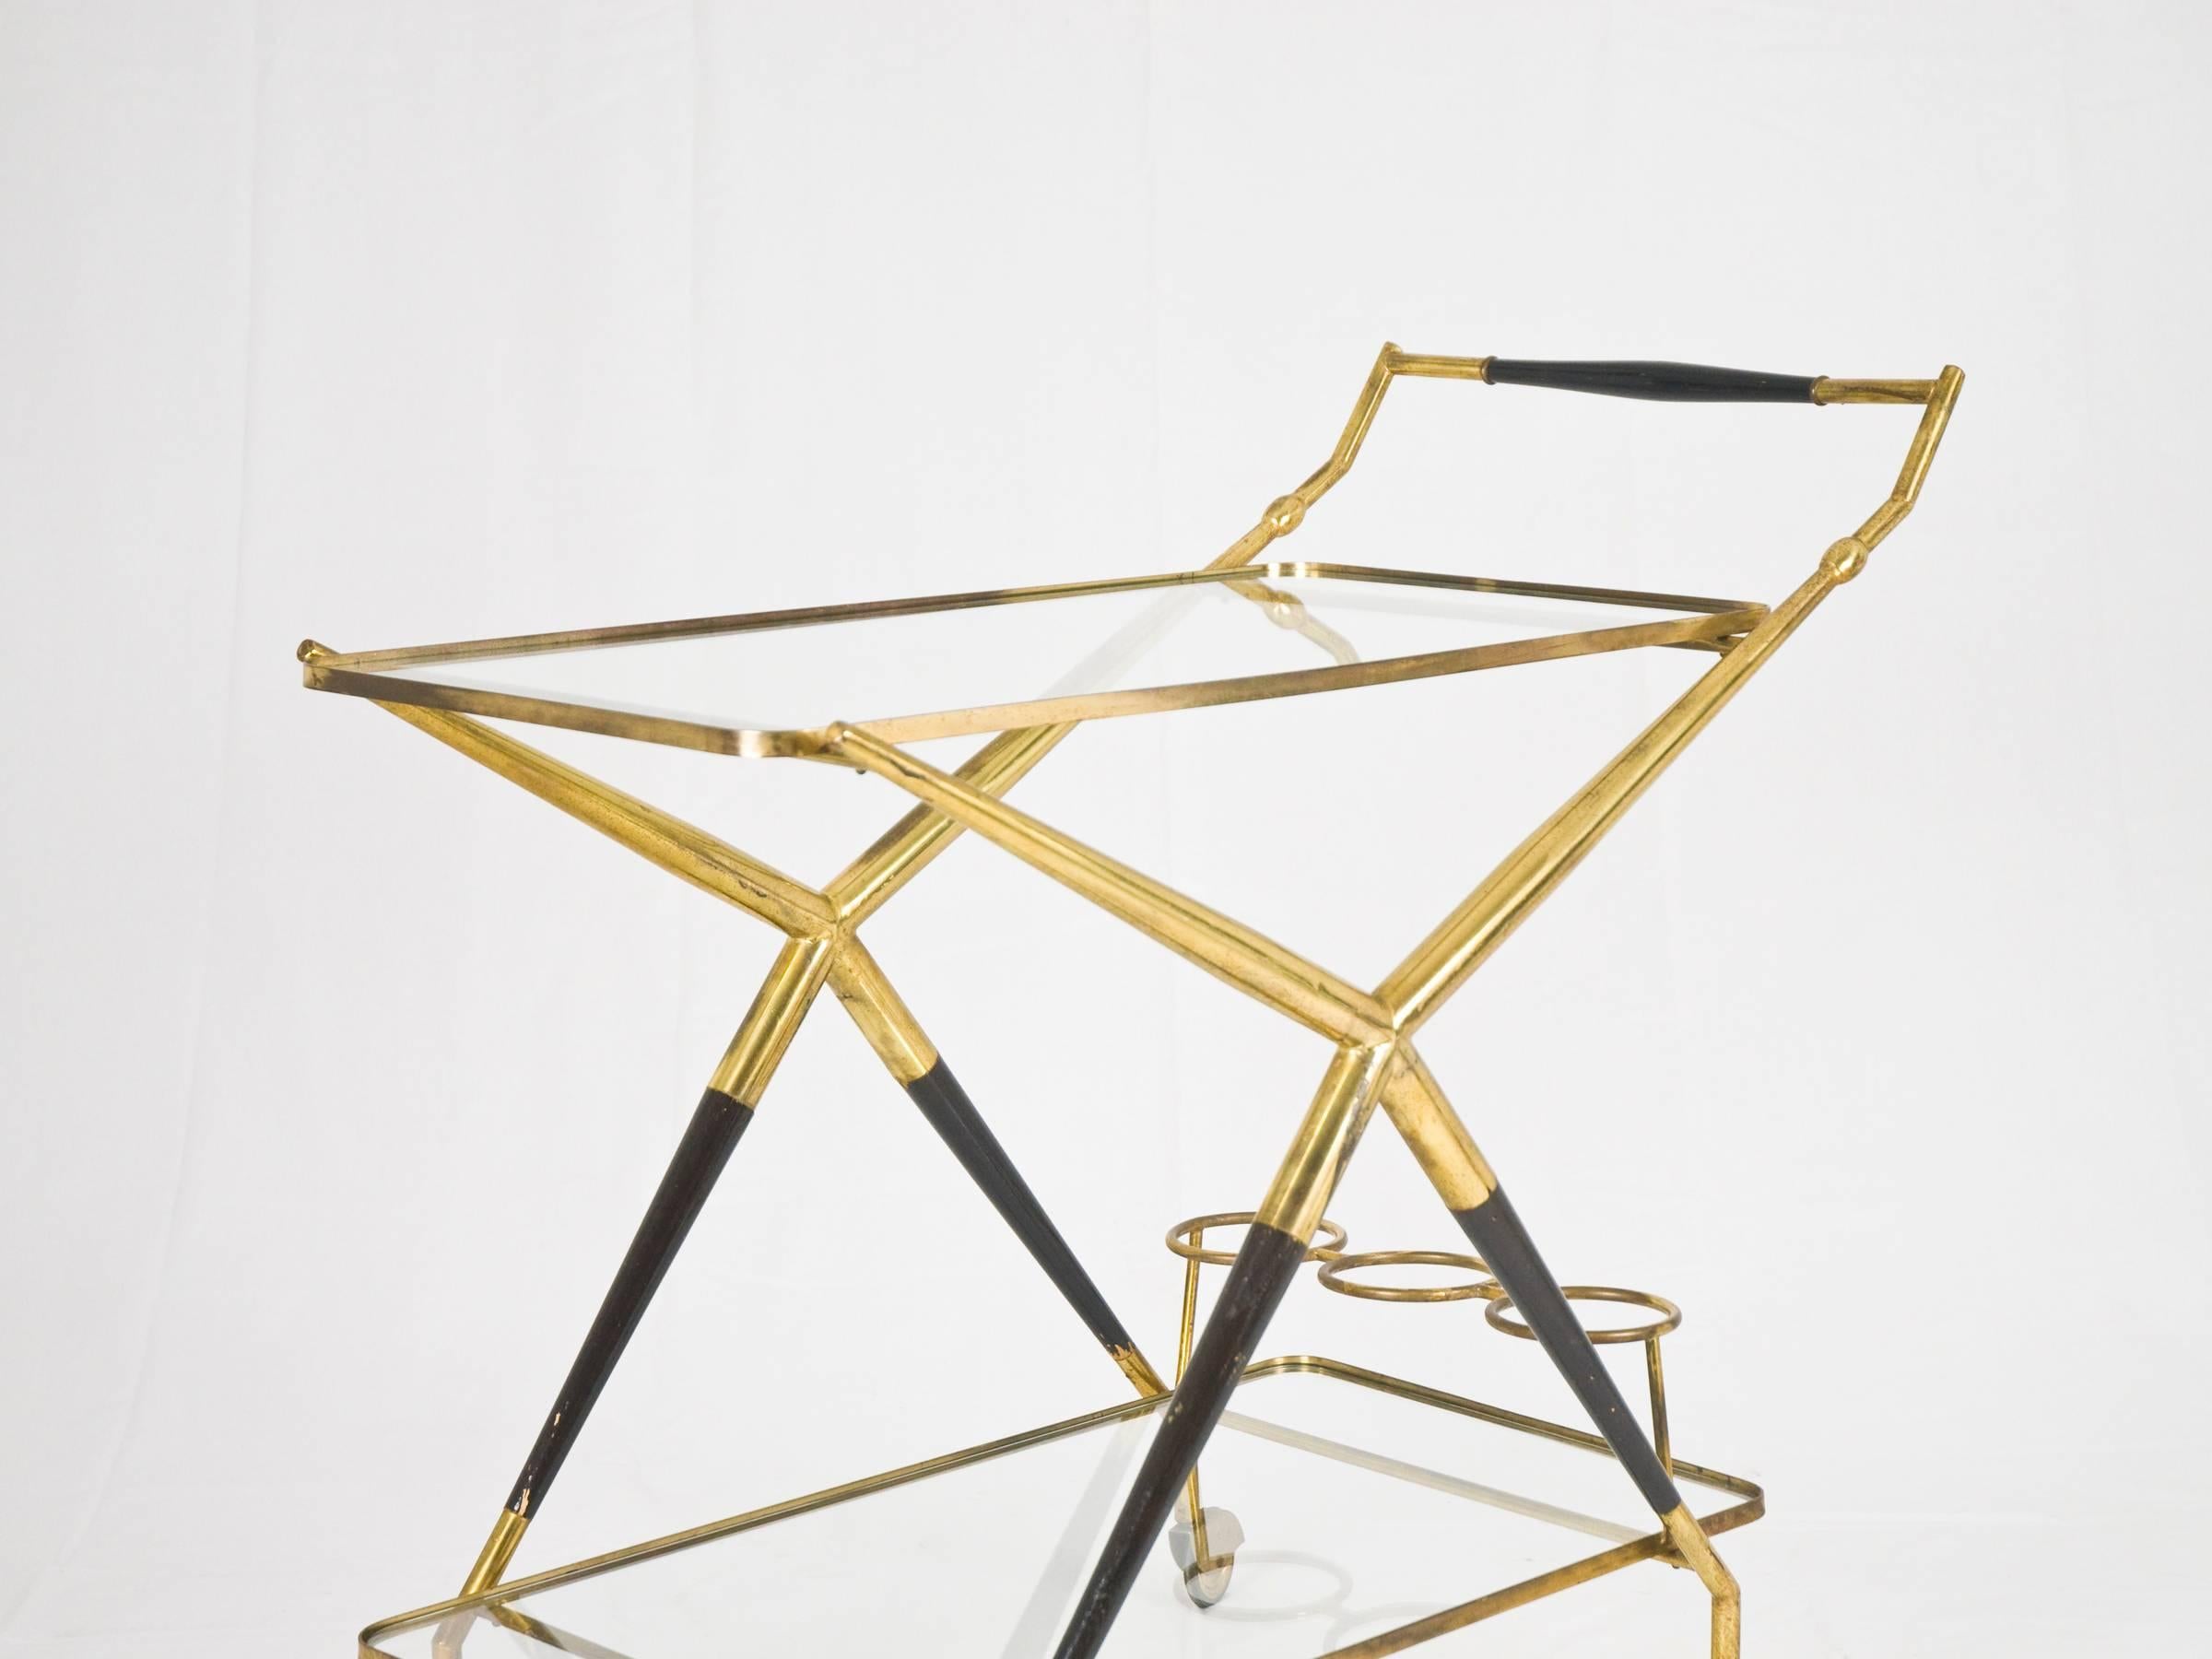 This serving trolley is made from a brass and laquered wood structure, supporting two glass shelves with brass edging. All sitting on brass and rubber wheels.